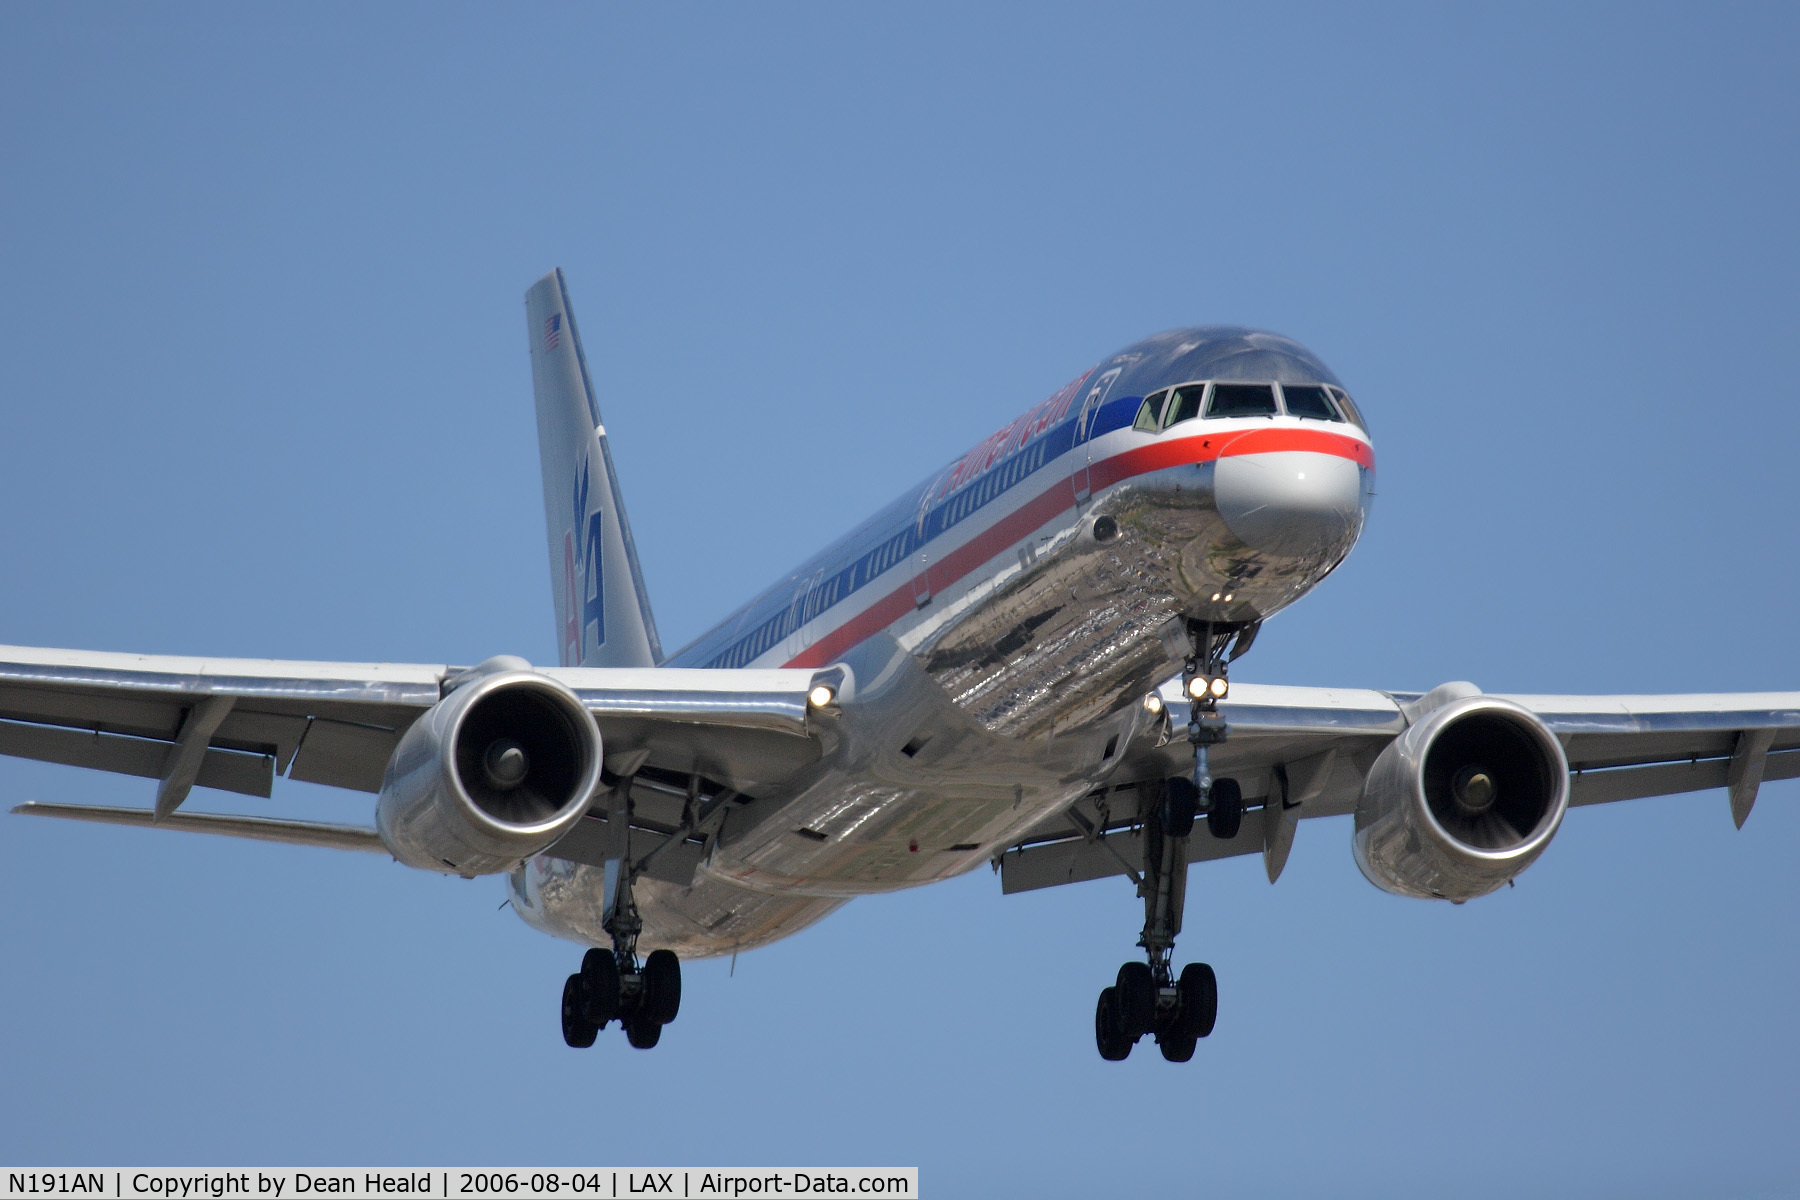 N191AN, 2001 Boeing 757-223 C/N 32385, American Airlines N191AN (FLT AAL161) from Miami Int'l (KMIA) on final approach to RWY 24R.